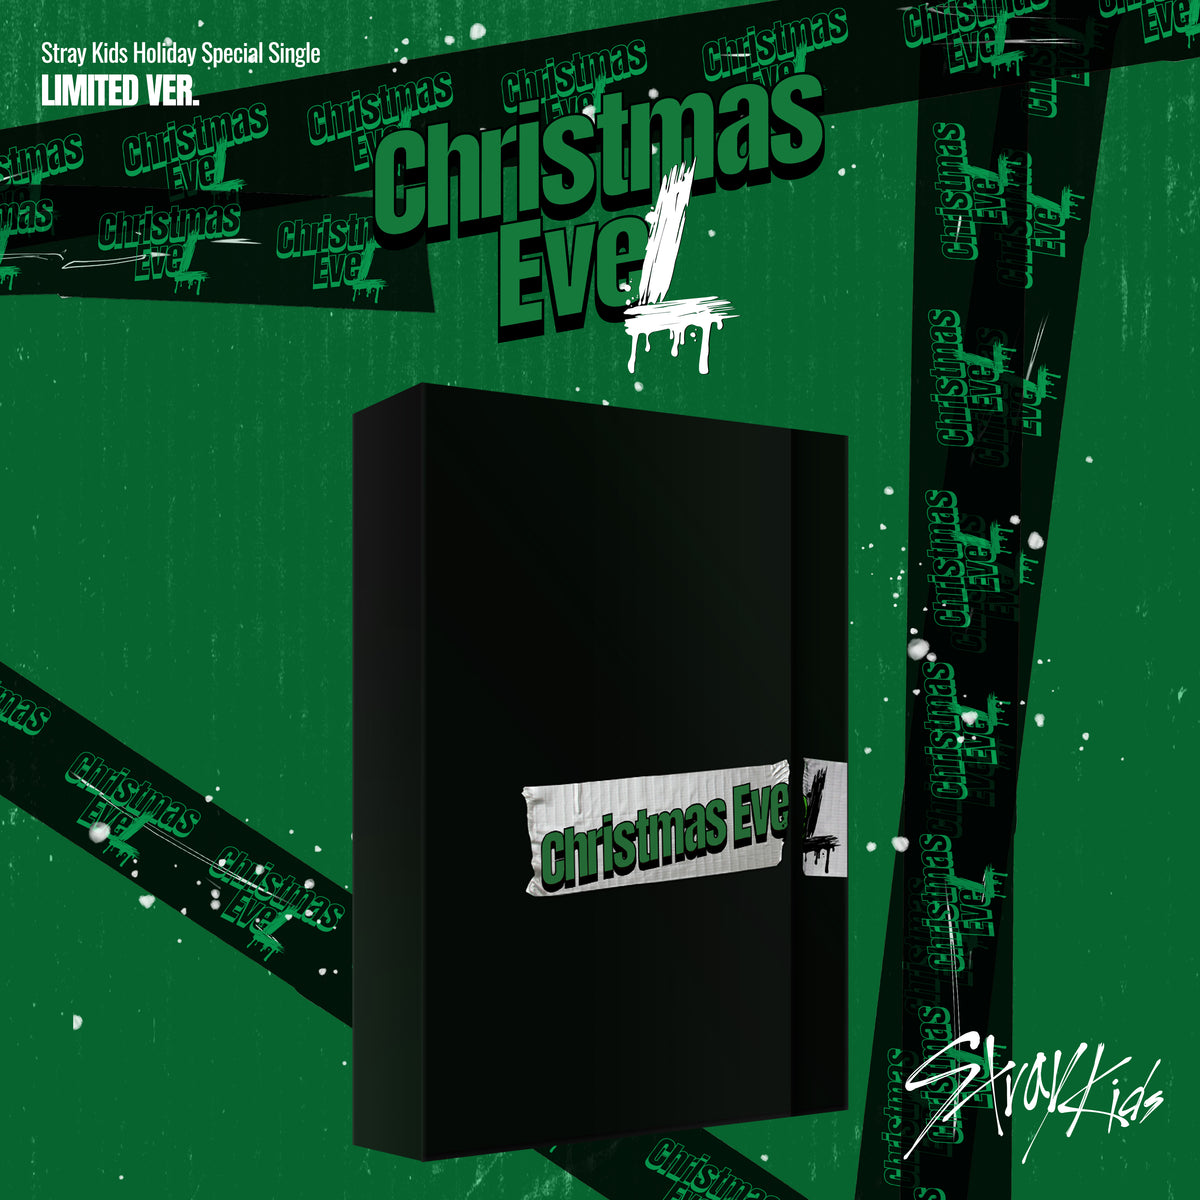 STRAY KIDS HOLIDAY SPECIAL SINGLE ALBUM - CHRISTMAS EVEL (LIMITED VER.)